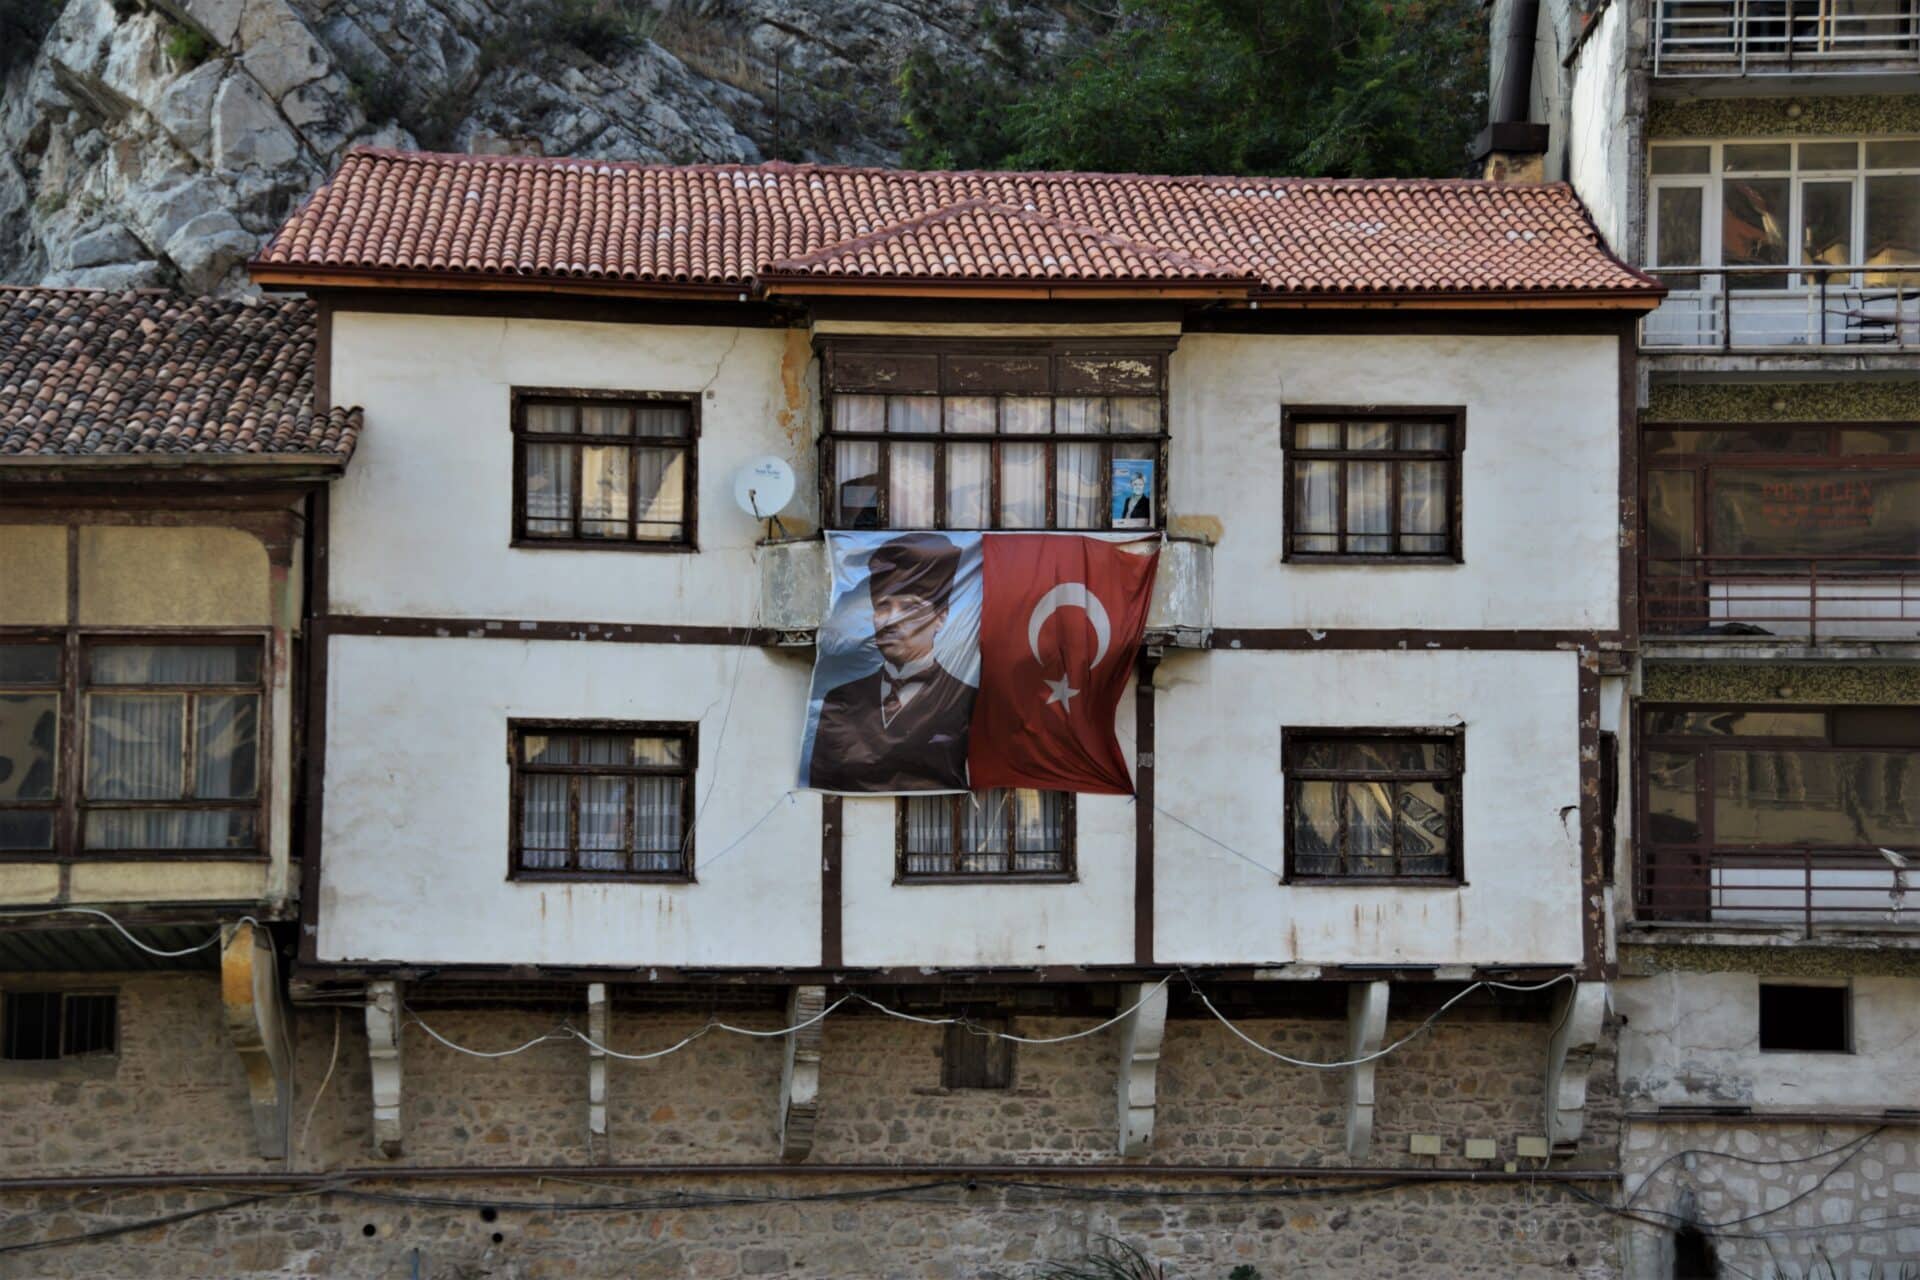 two banners, depicting Atatürk and the Turkish flag, hang from a balcony of an old Ottoman house